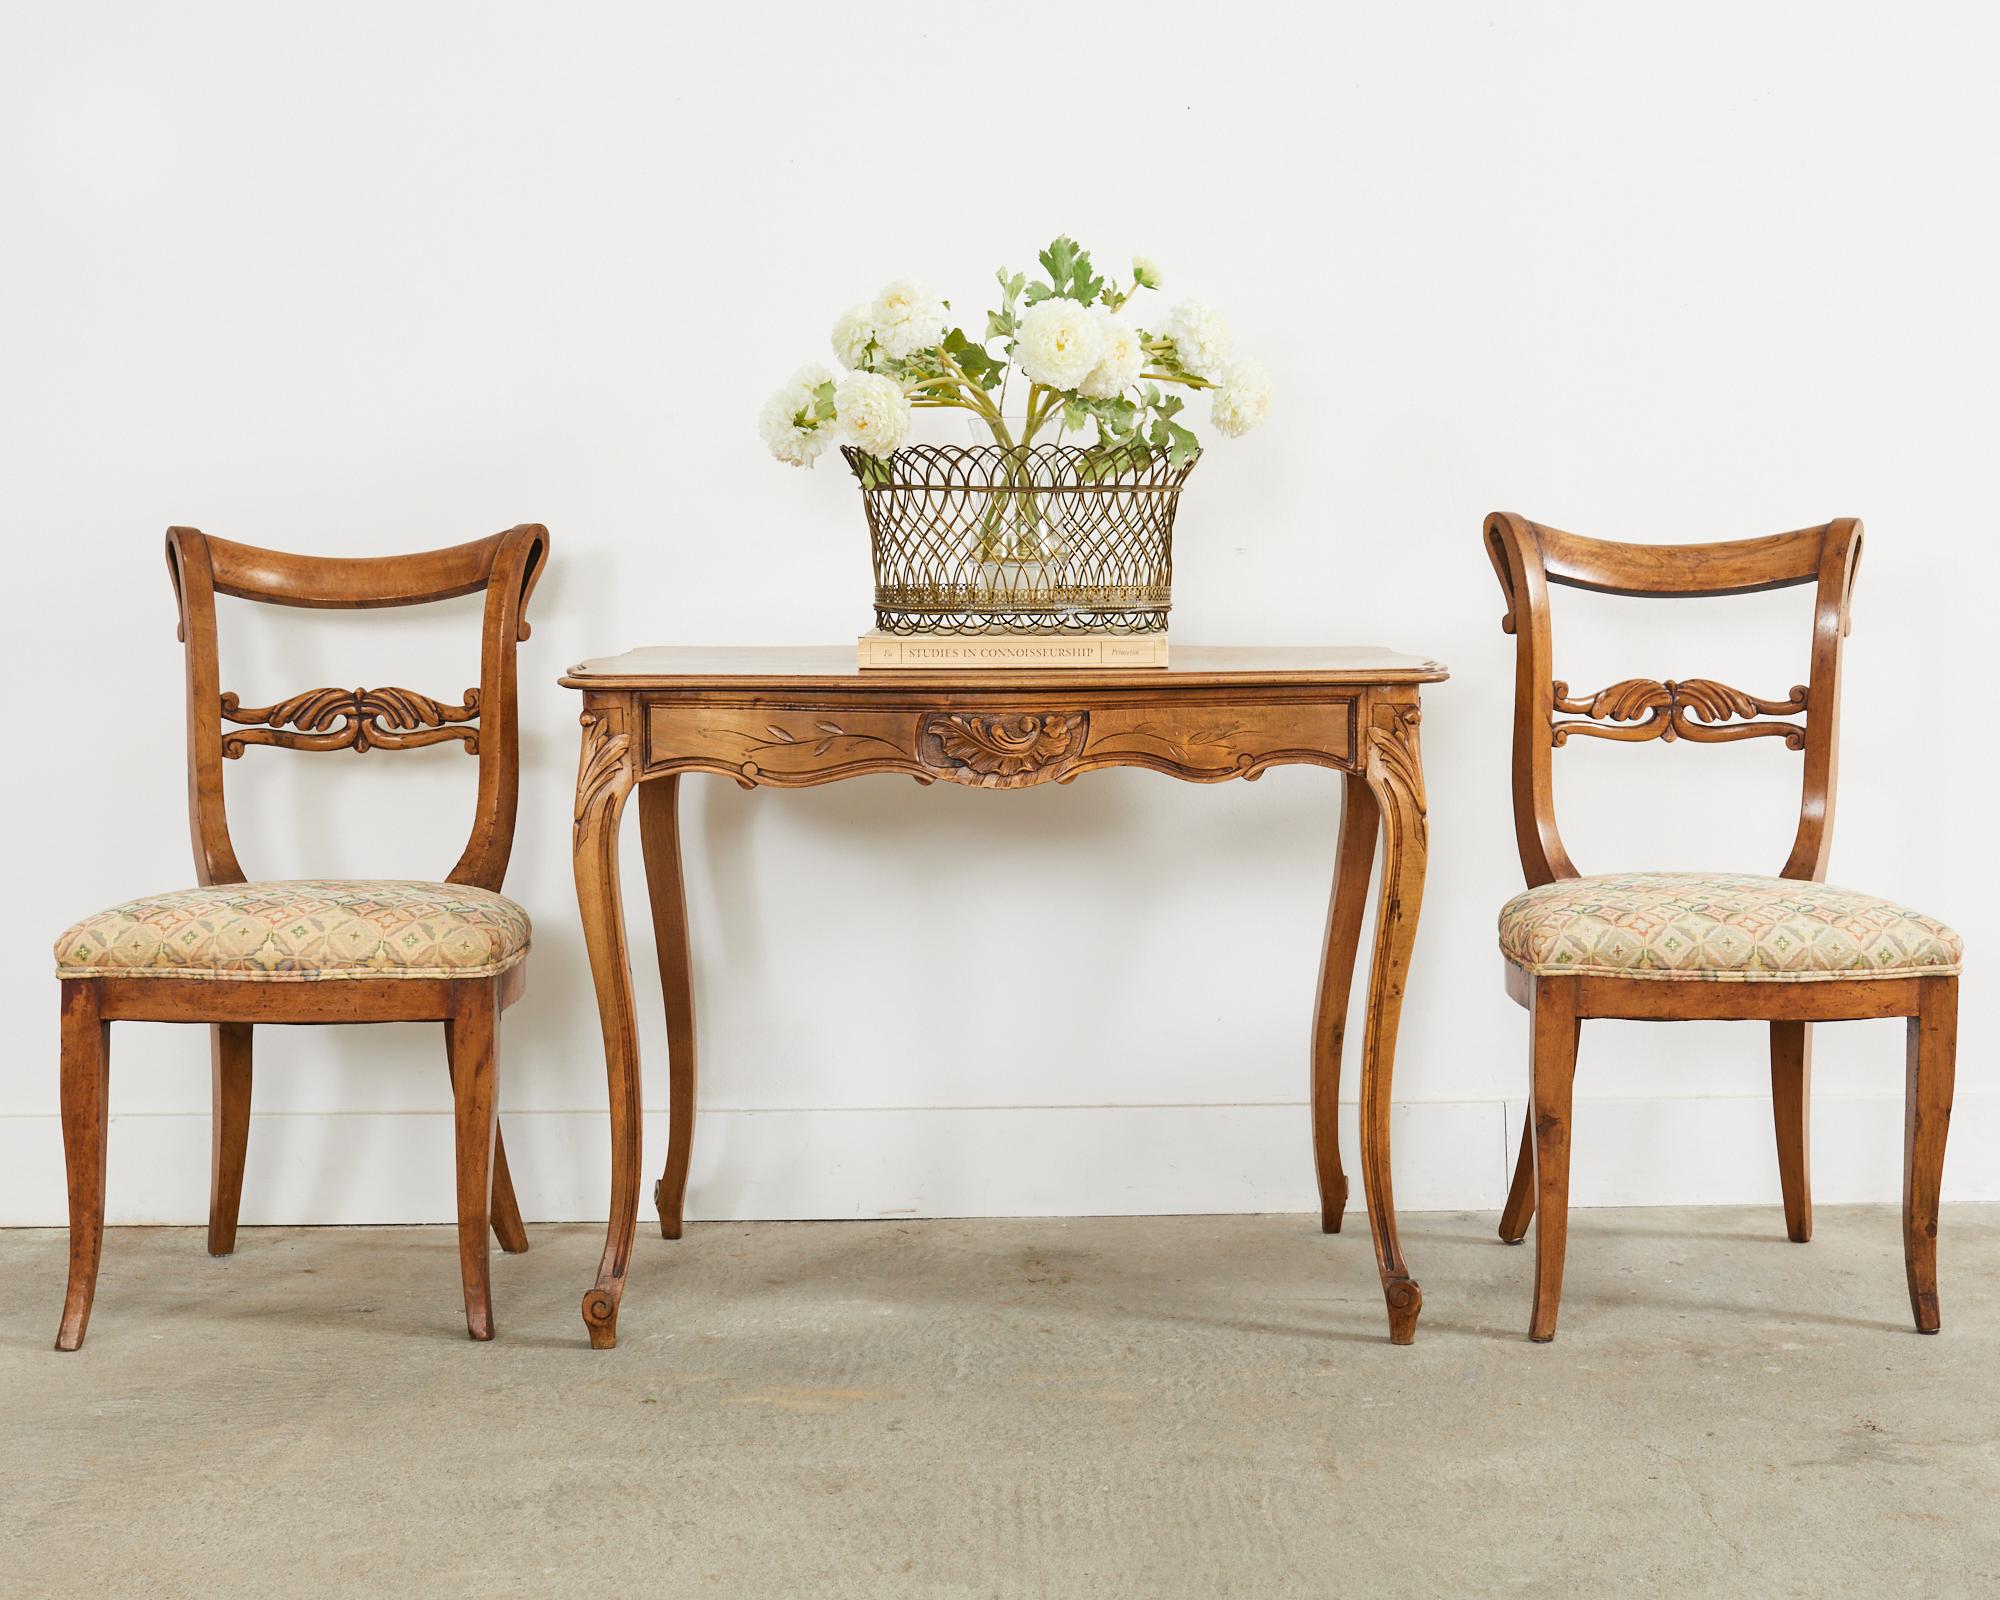 Gorgeous transitional pair of 19th century French hall chairs crafted from fruitwood. The chairs are crafted in the Louis Philippe manner and period but also still retain styling design cues from the empire period. The frames have gracefully curving